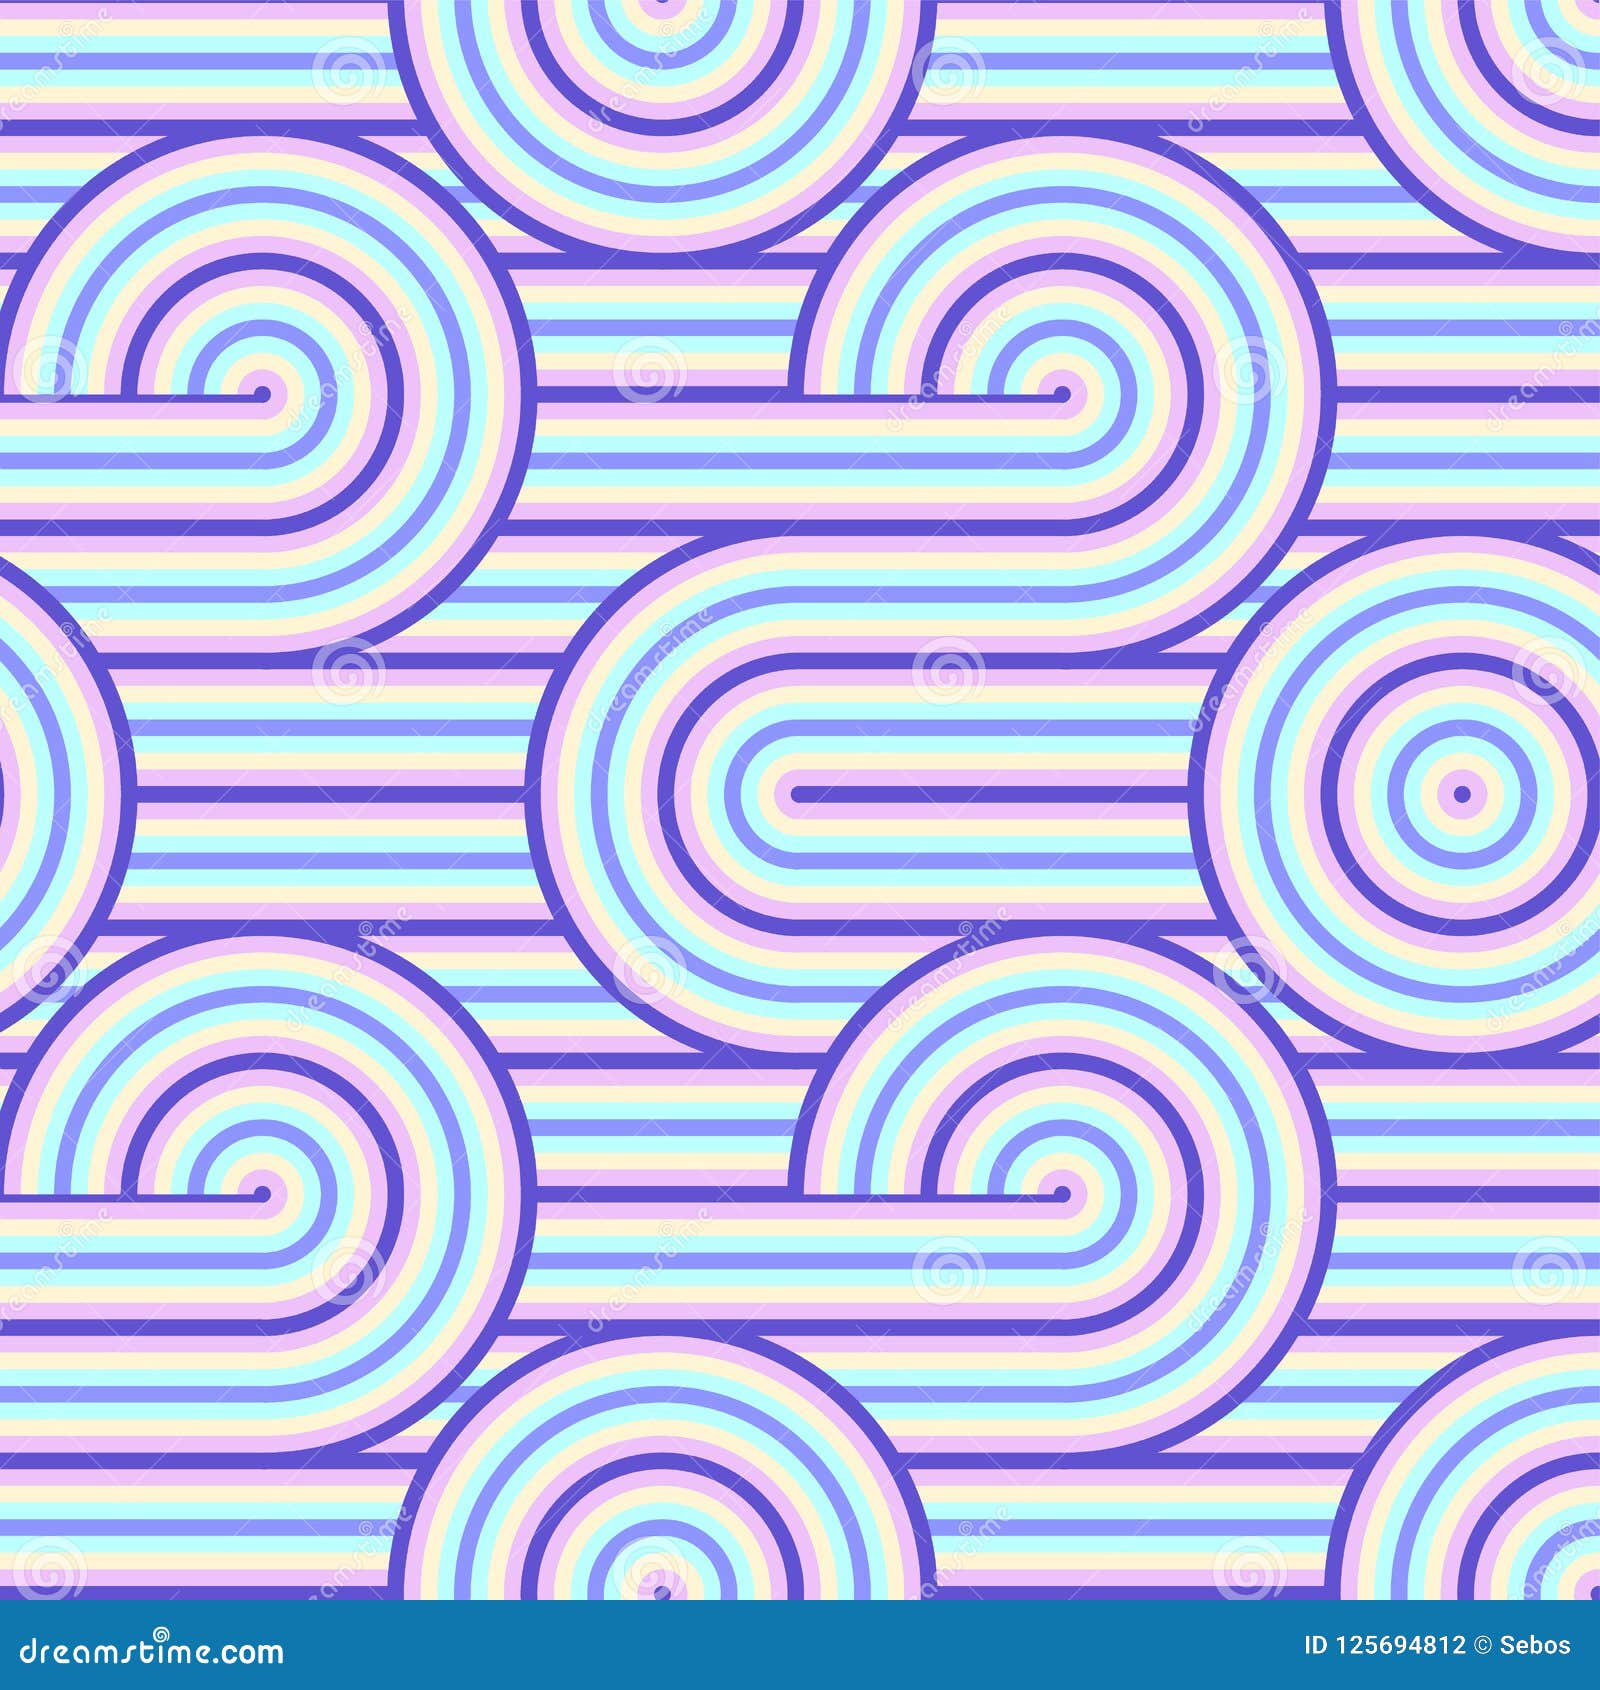 abstract  seamless op art pattern. colorful pop art, graphic ornament. optical illusion 70s.